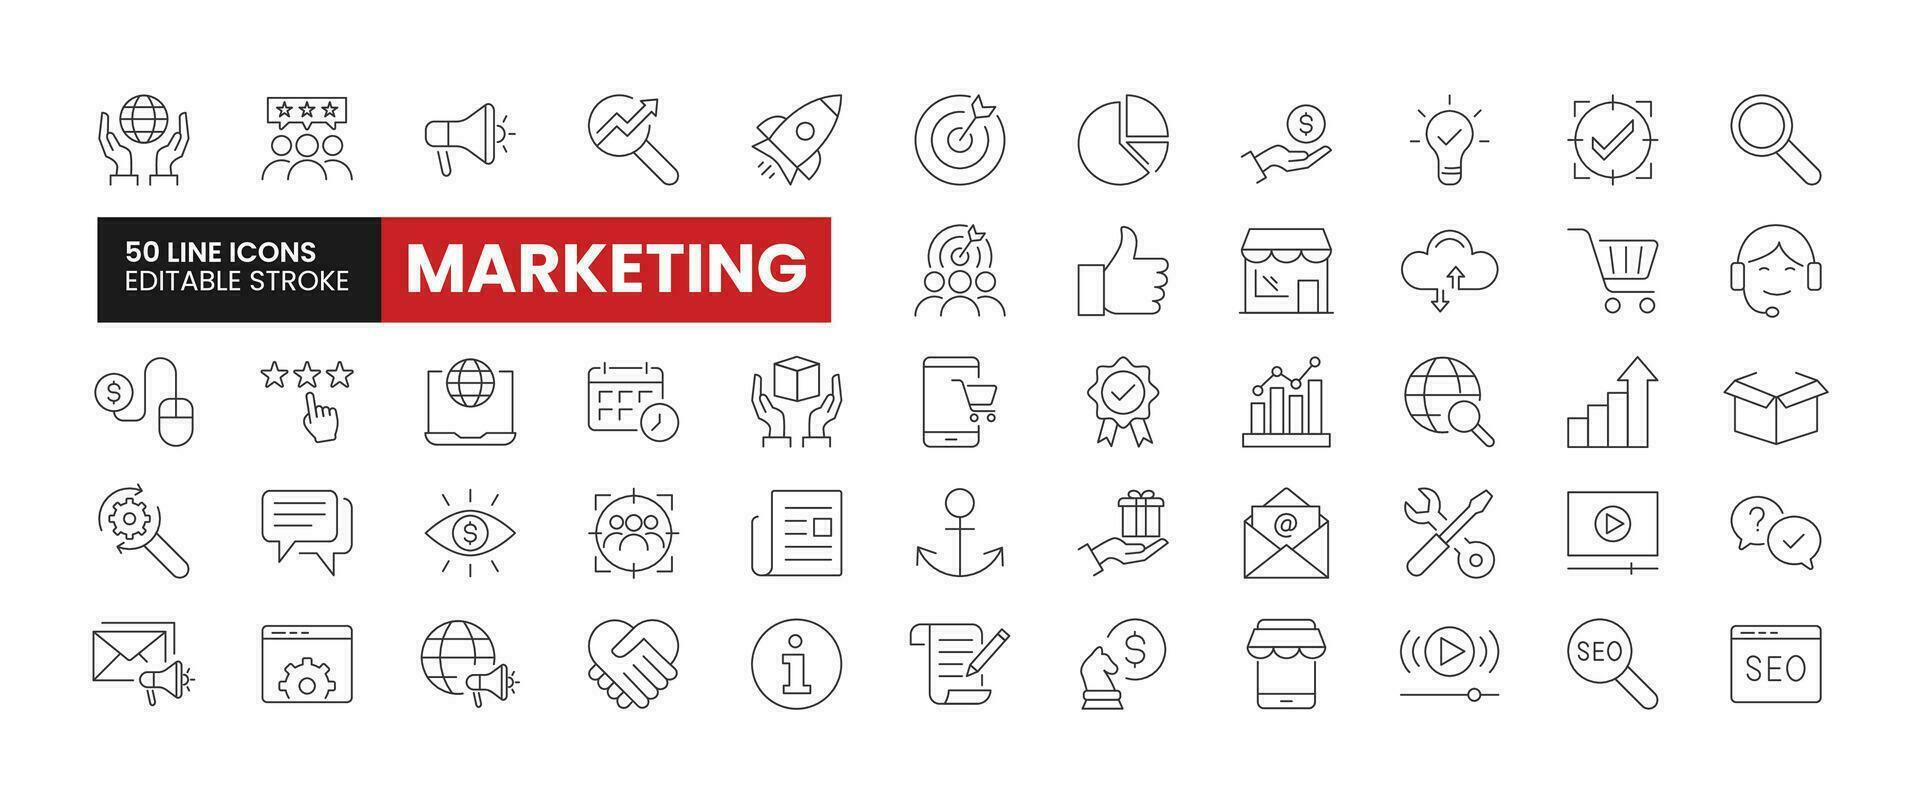 Set of 50 Digital Marketing line icons set. Digital Marketing outline icons with editable stroke collection. Includes Marketing, Customers, SEO, Earnings, Target Audience and More. vector